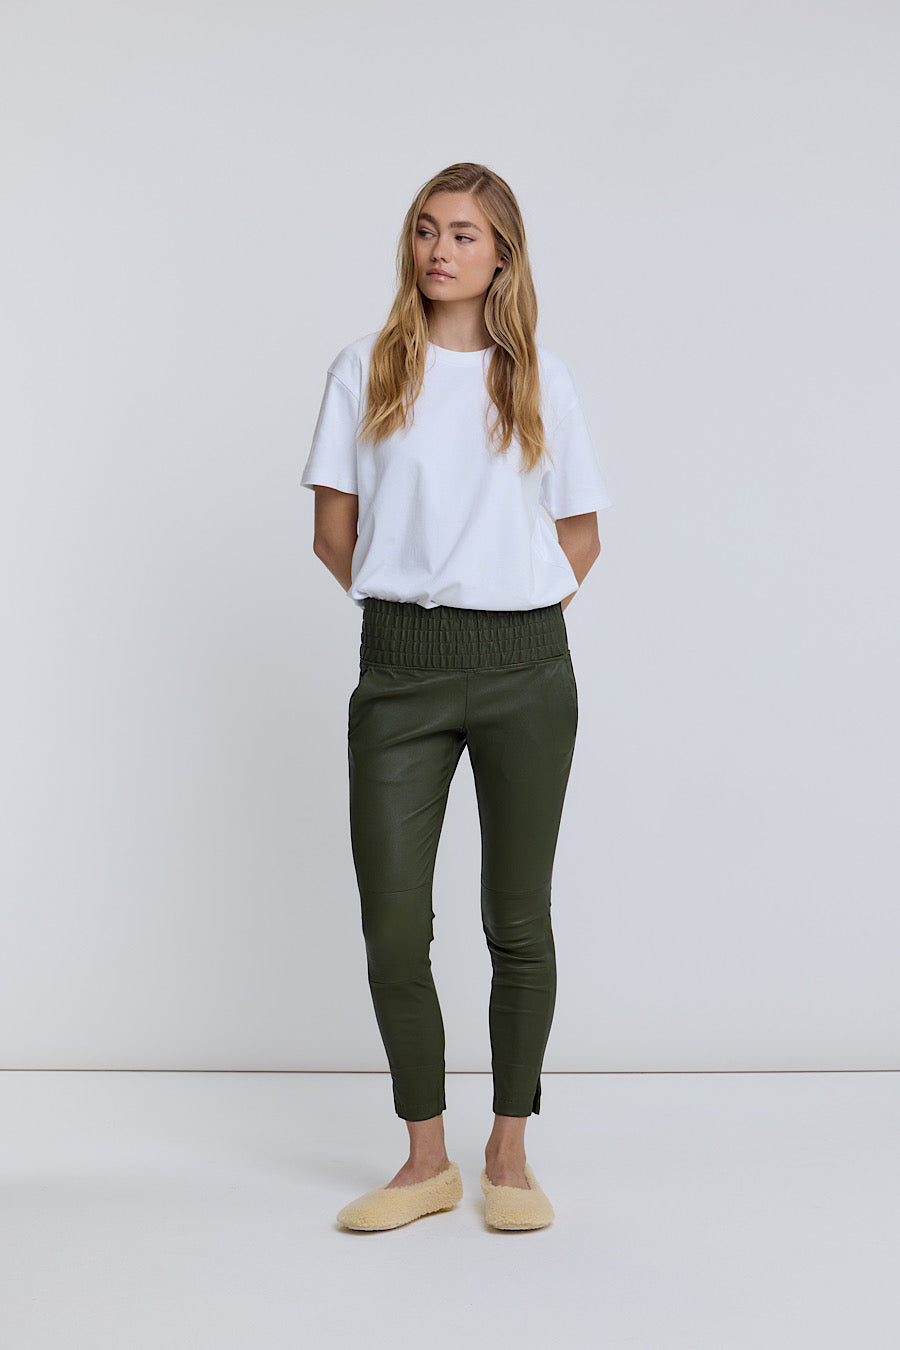 OLIVE STRETCH LEATHER JOGGER